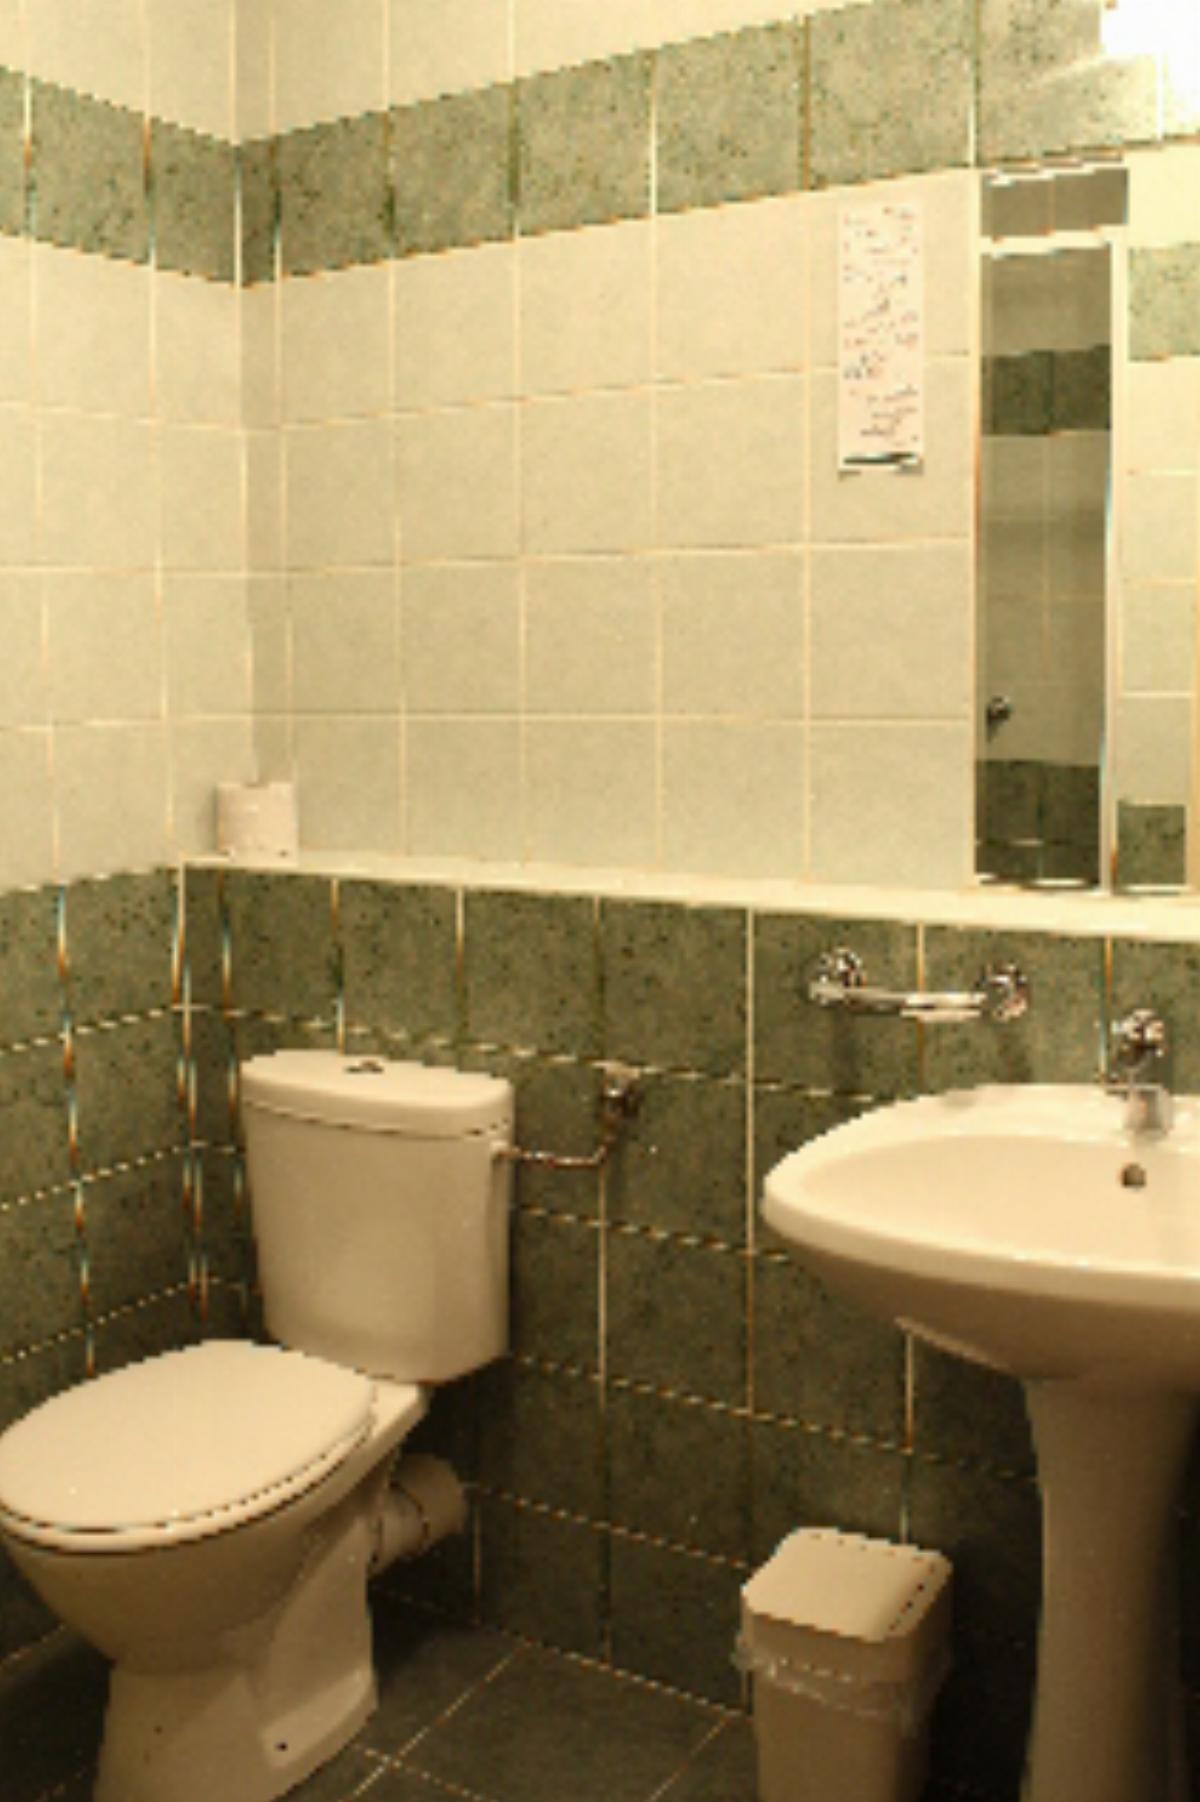 Boulevard City Pension and Apartments Hotel Budapest Hungary